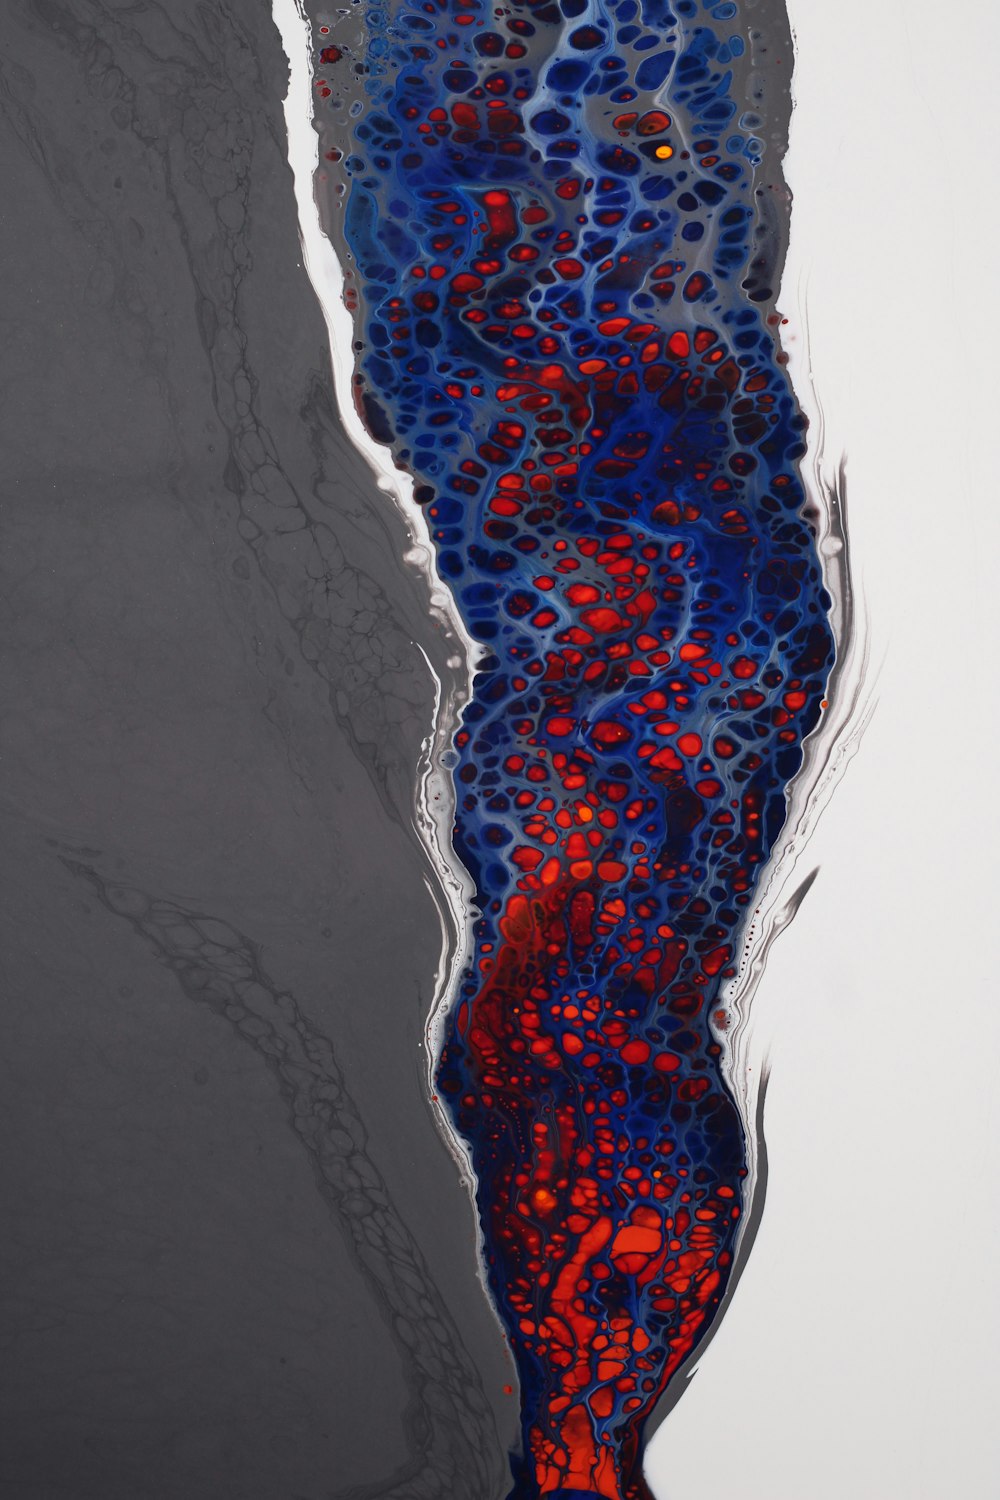 a red and blue substance floating on top of a body of water